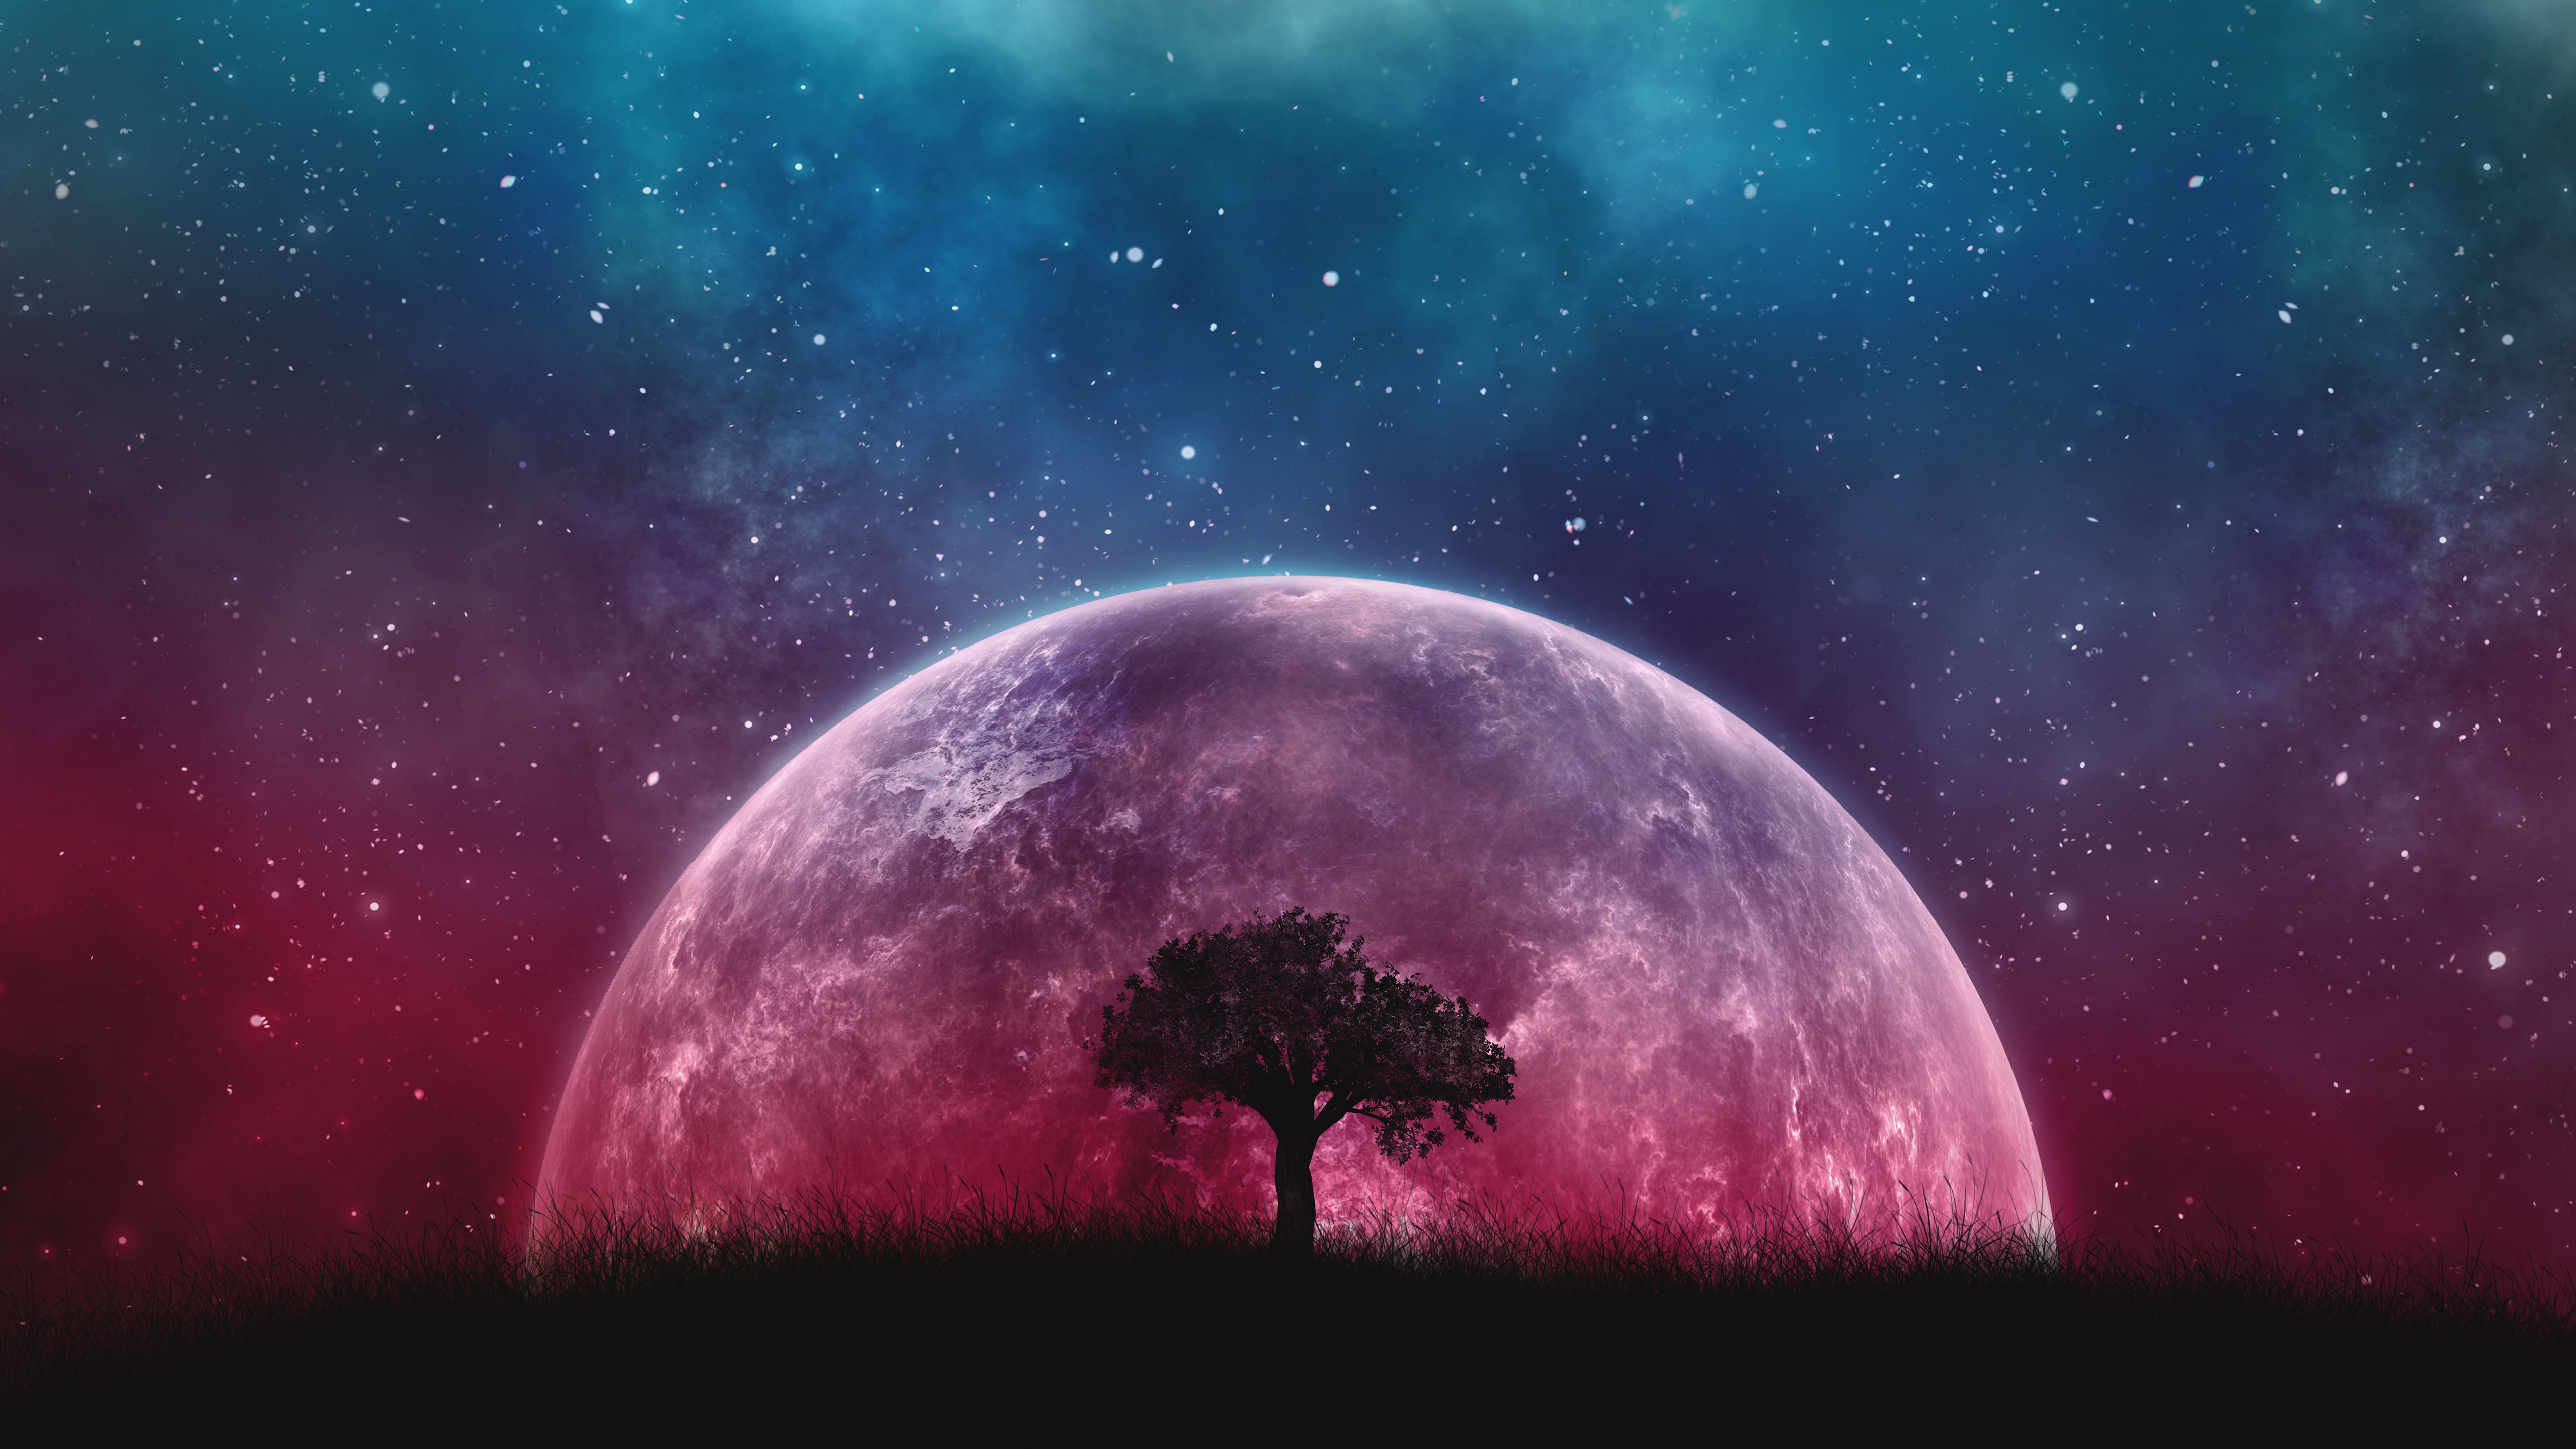 Moon Landscape 5k Wallpapers - Galaxy Background With Moon - HD Wallpaper 